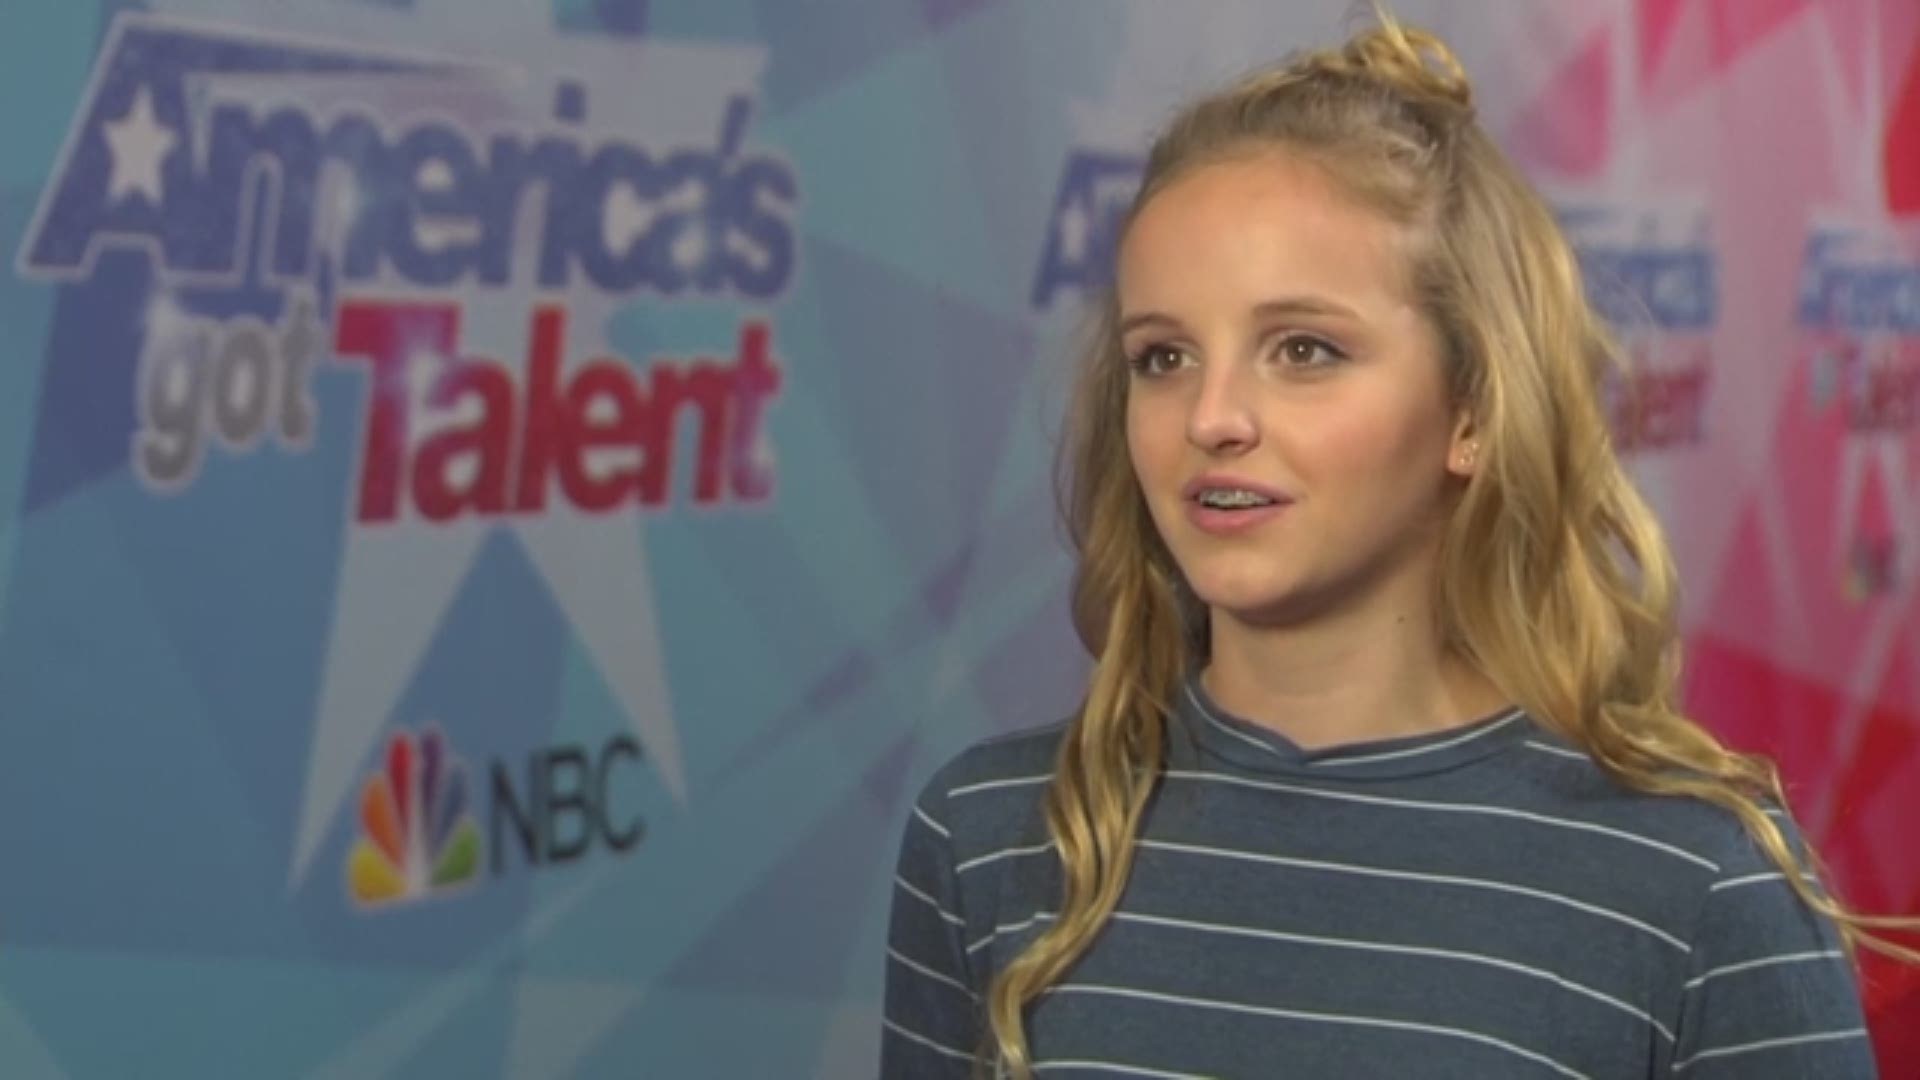 Evie Clair talks about her dad after the America's Got Talent semifinals. He passed away days after she advanced to he finals. NBC